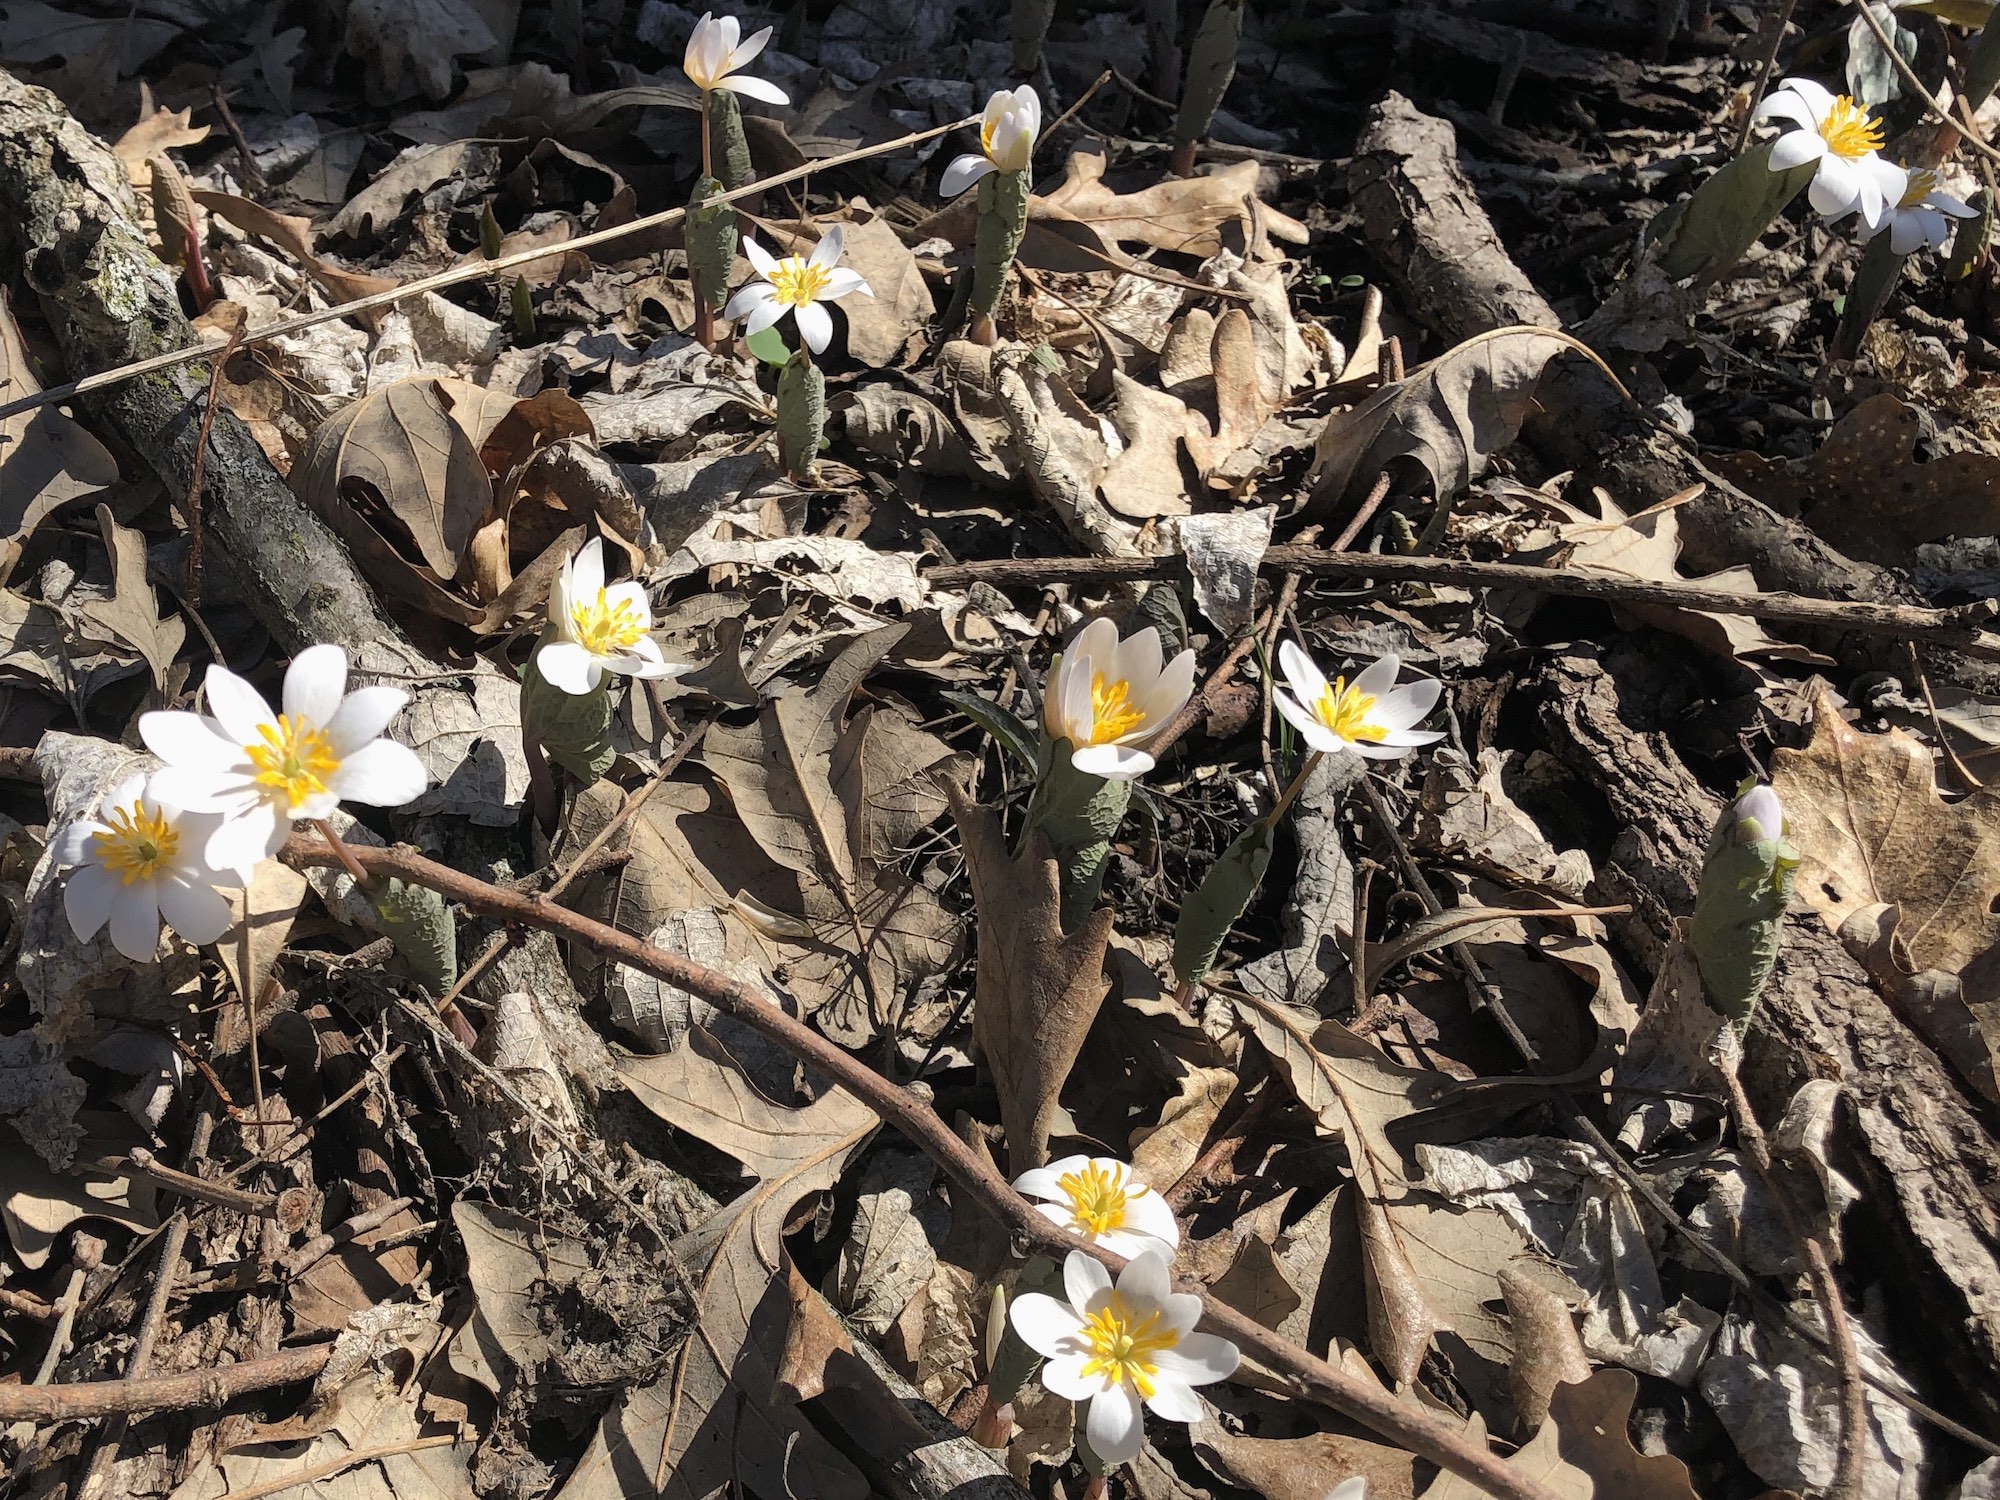 Bloodroot near Council Ring on April 8, 2019.